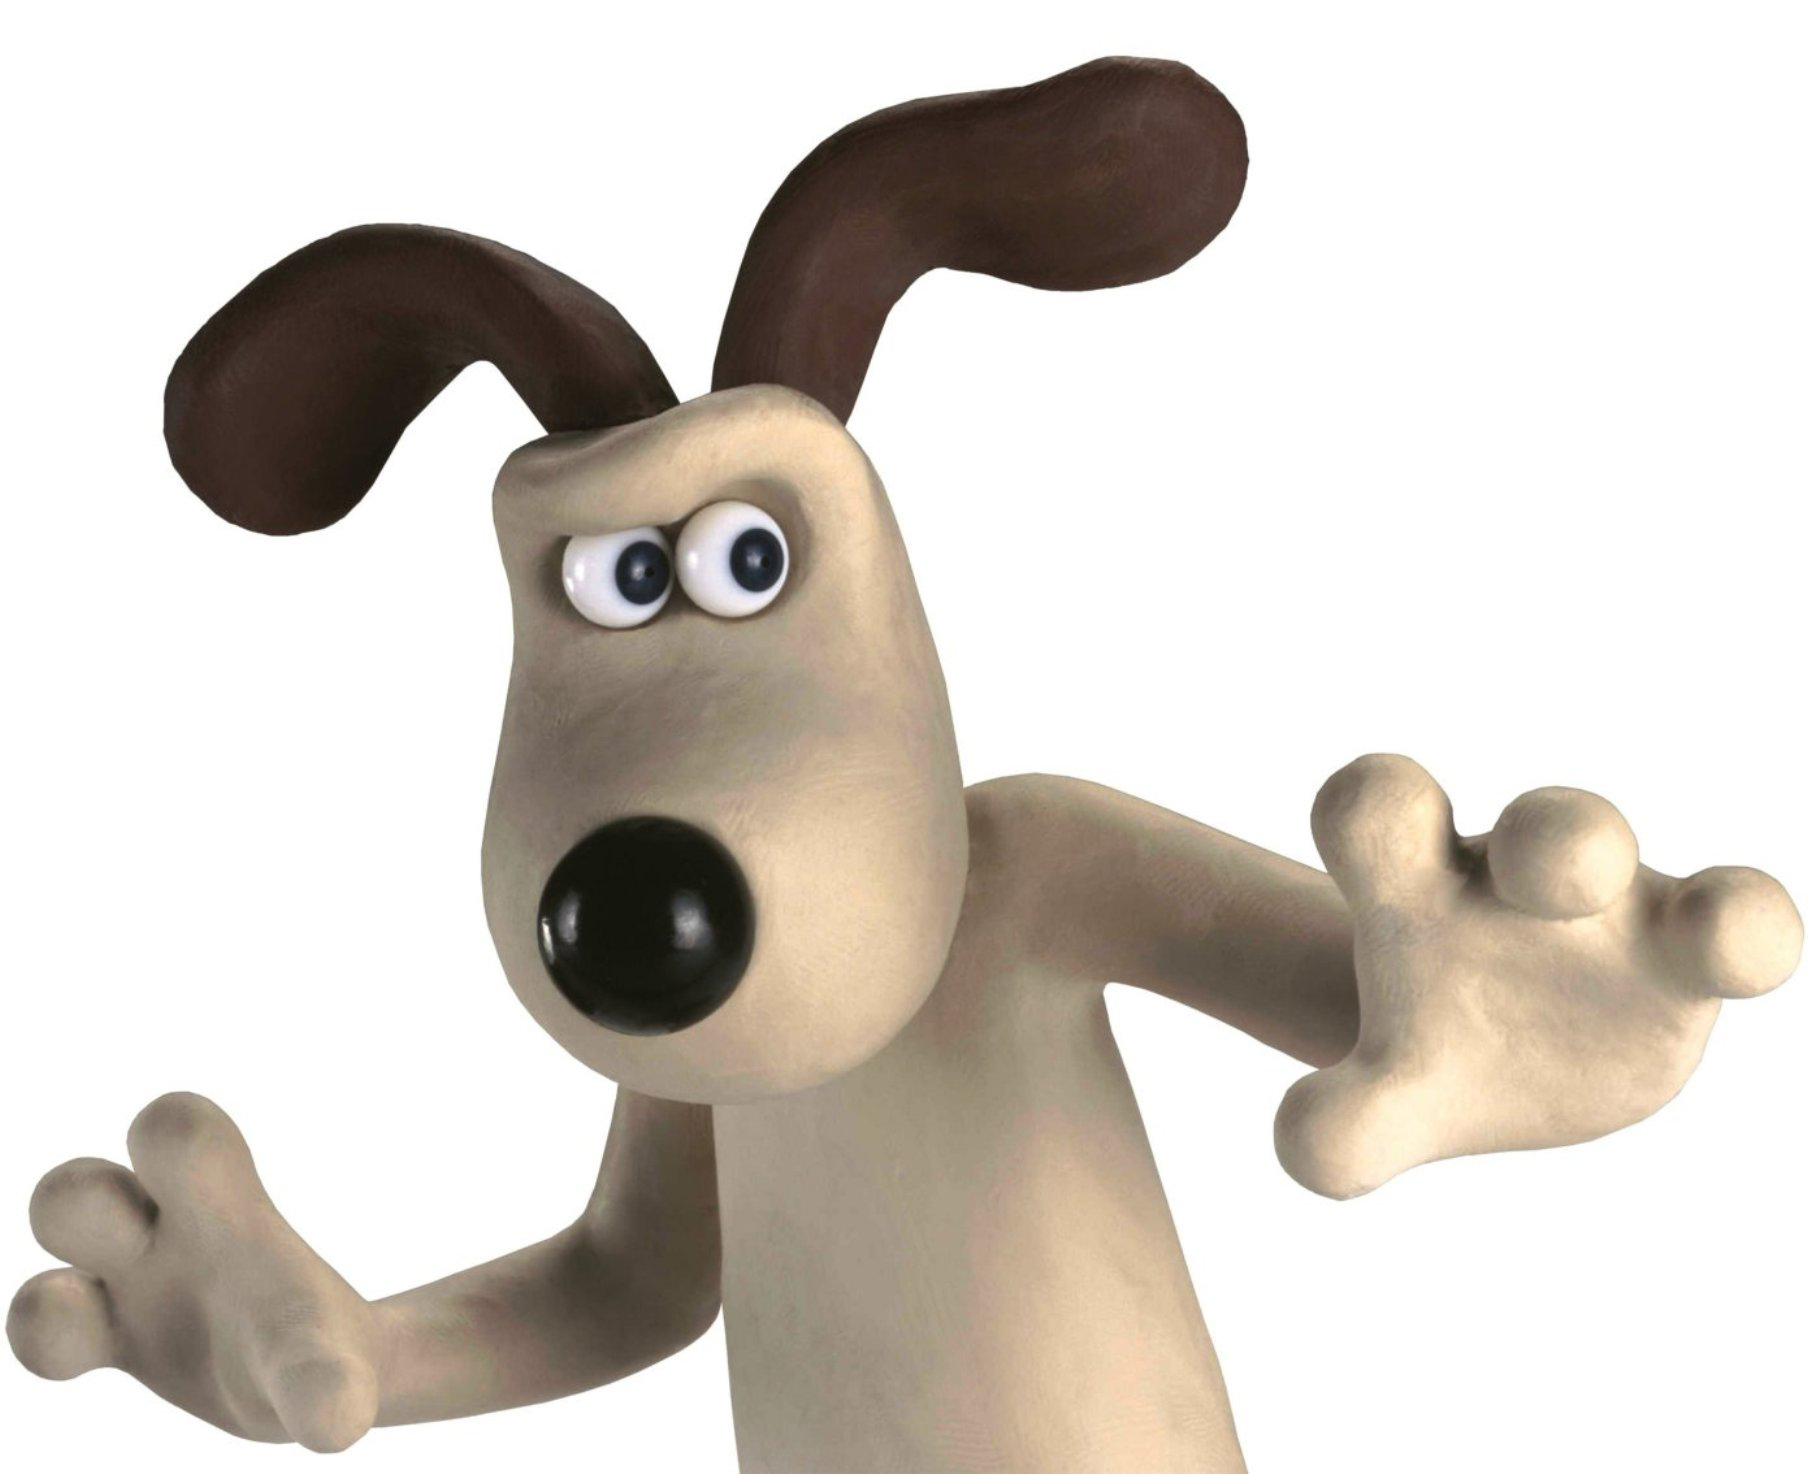 Wallace And Gromit Image The Curse Of Were Rabbit HD Wallpaper